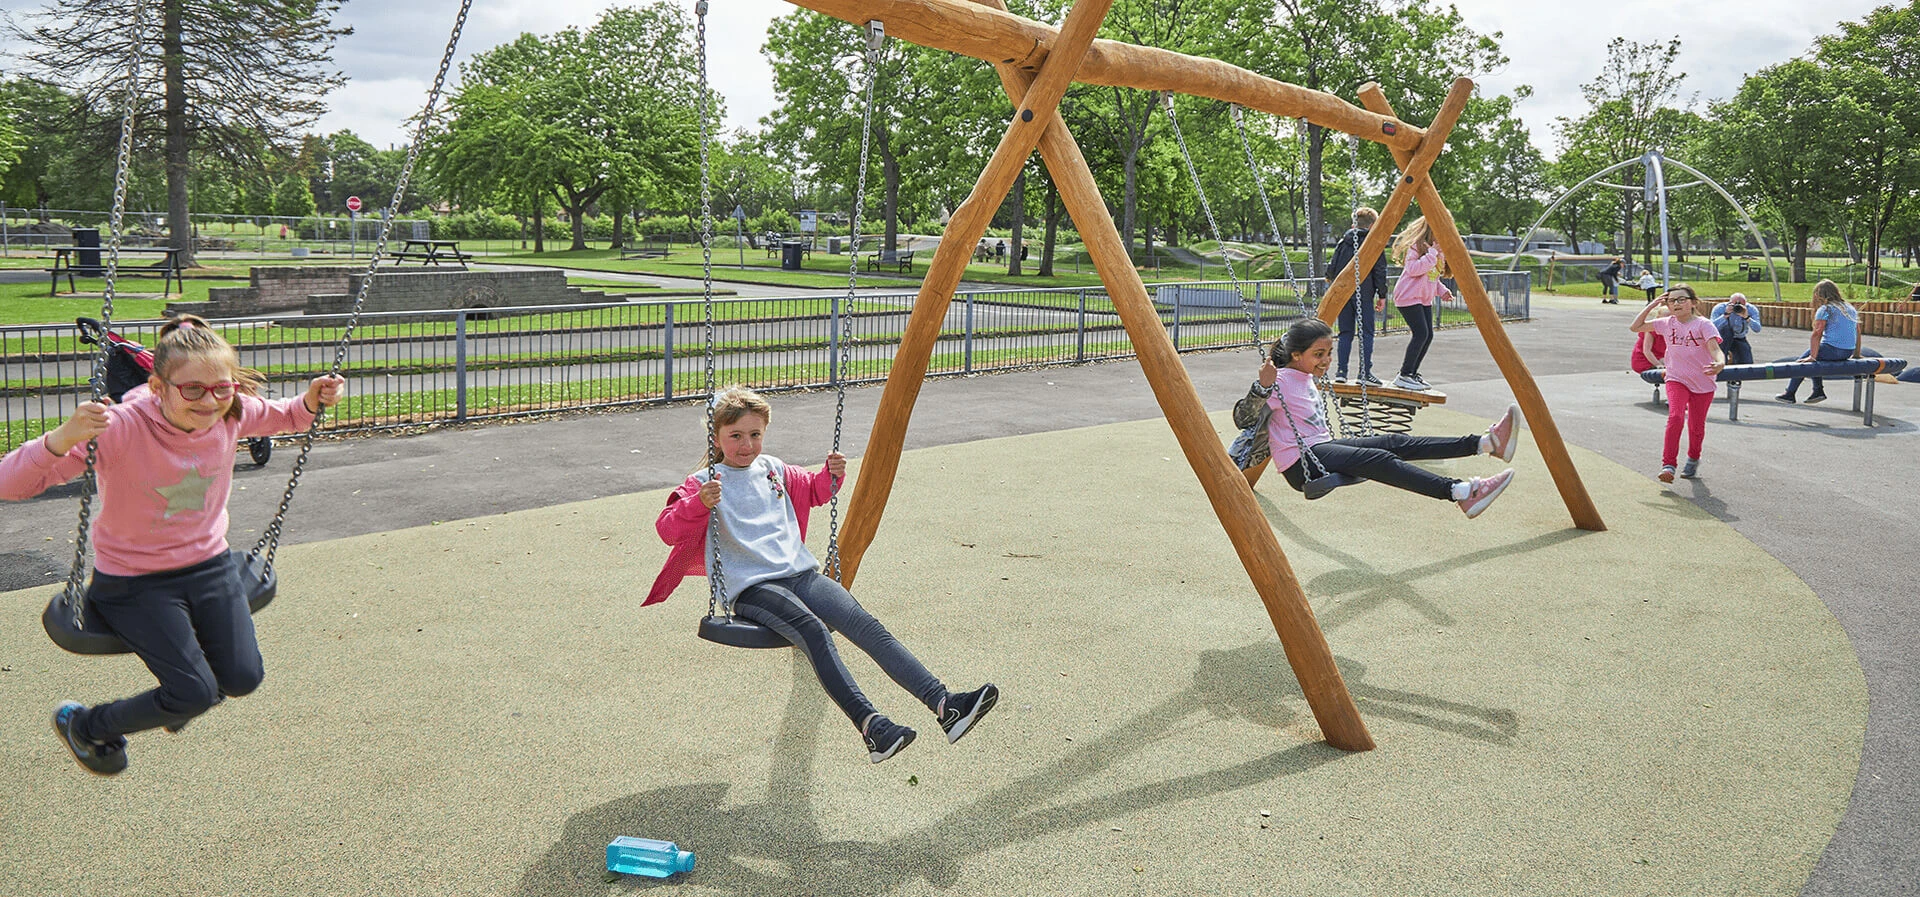 children playing on classic large wooden swings hero image